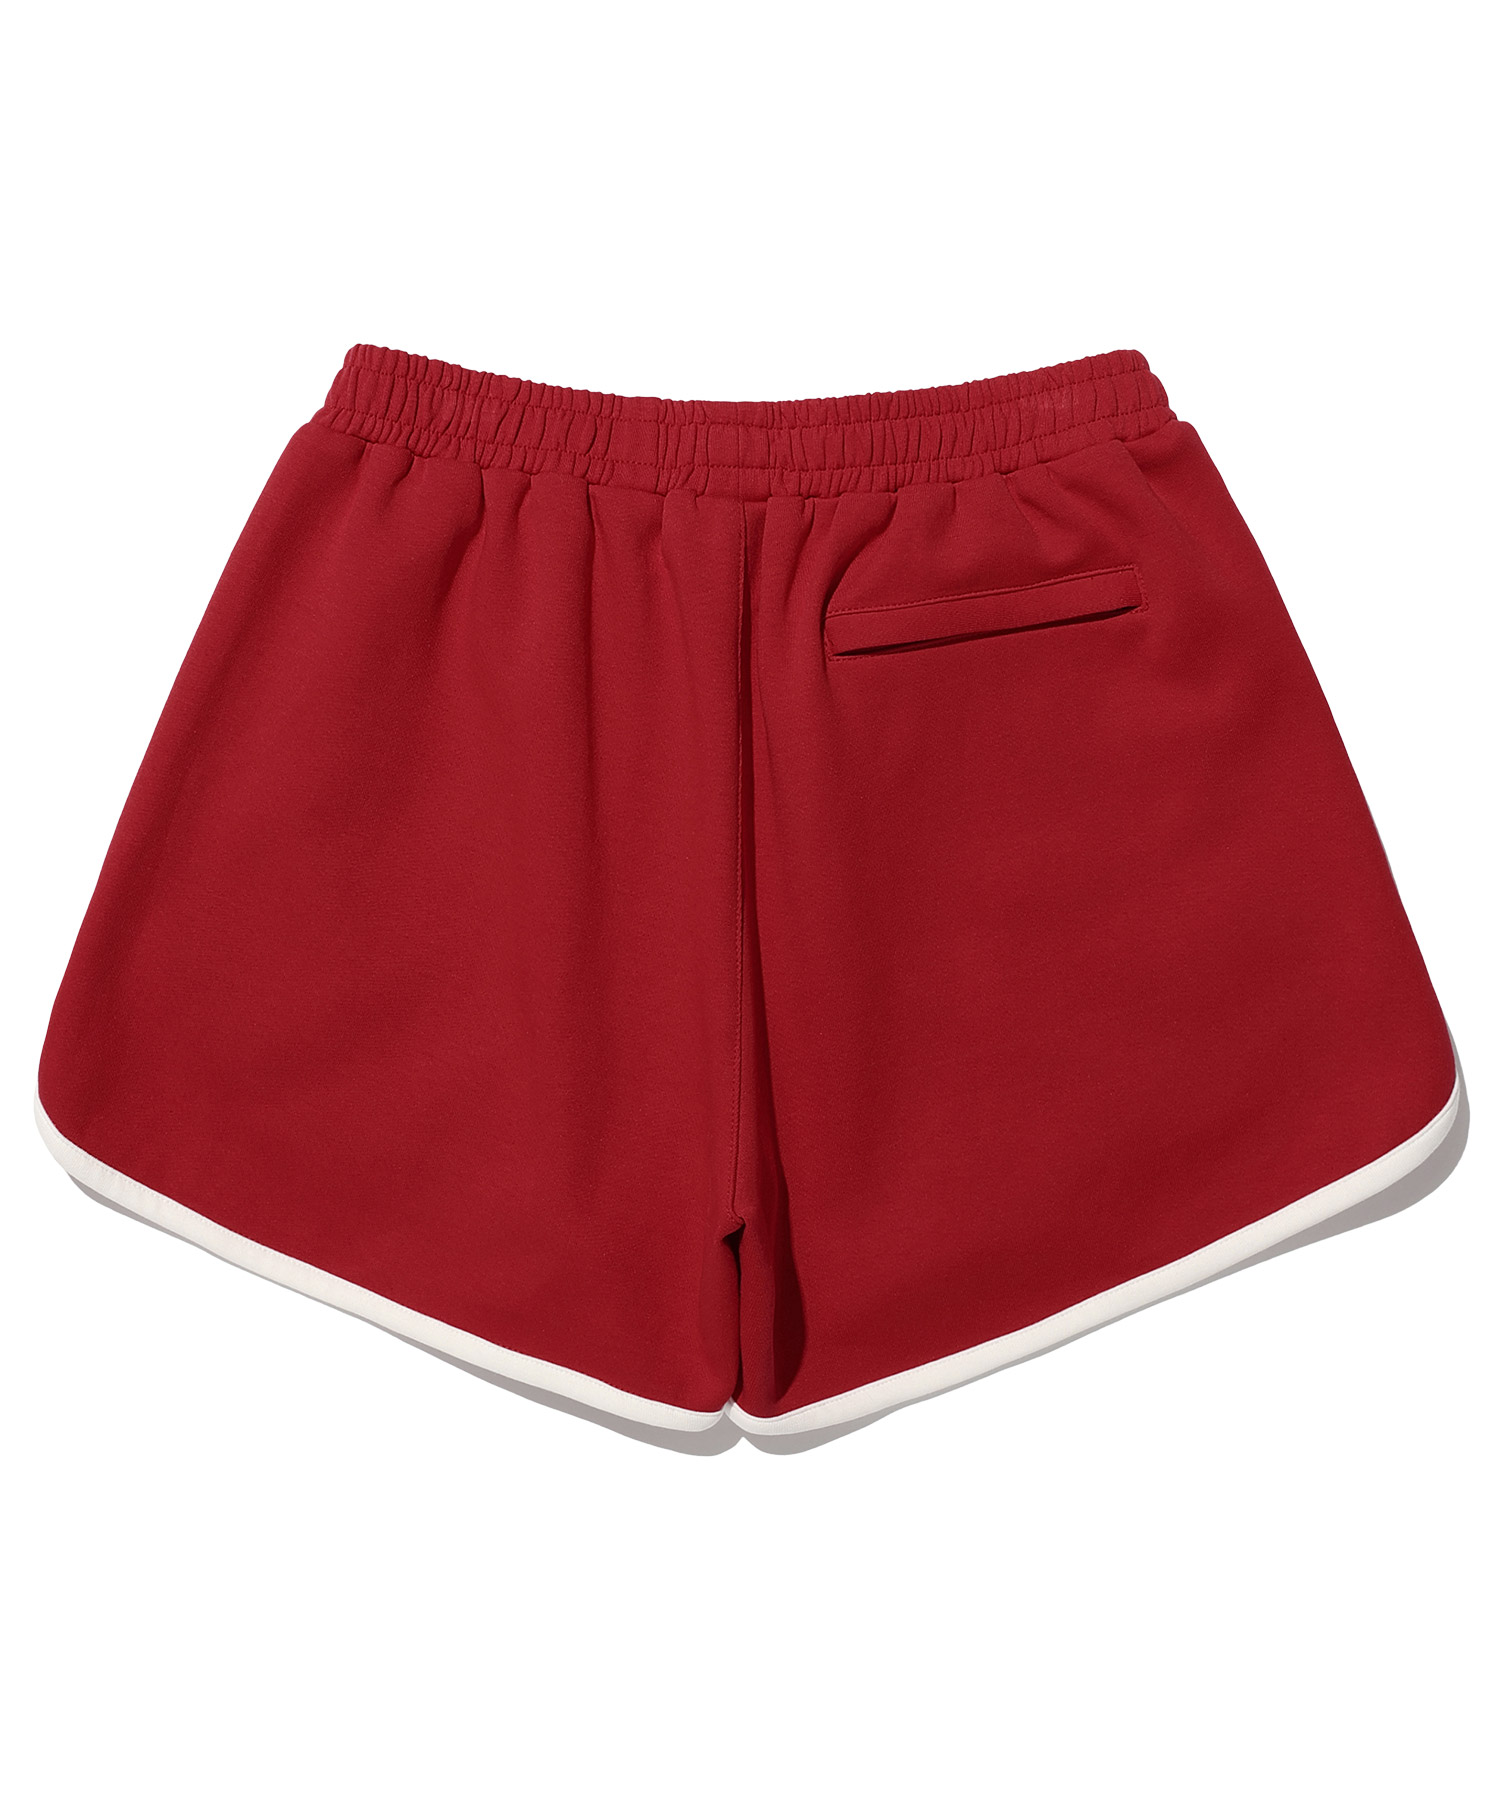 STAR LOGO DOLPHINE SHORTS[RED]